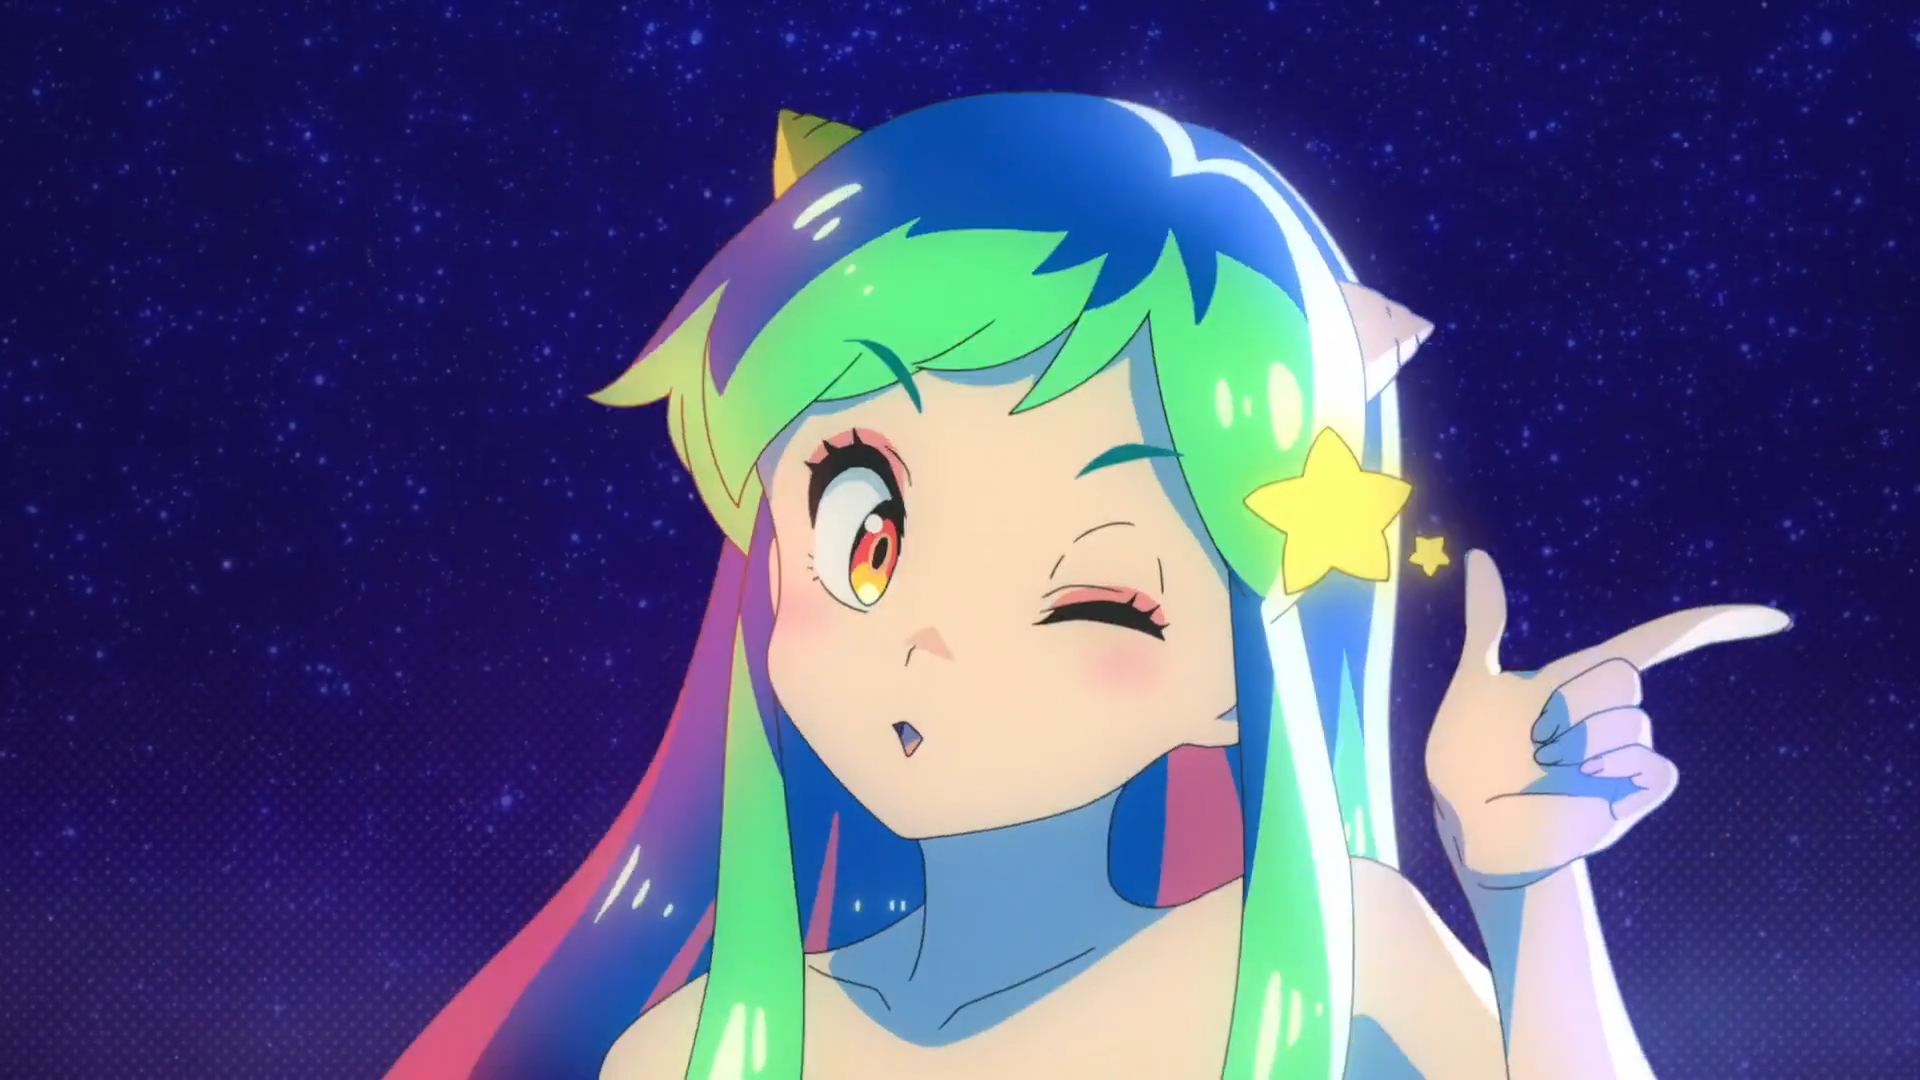 Is there any specific reason behind Lum's eye color being different in the  Urusei Yatsura 2022 remake? - Anime & Manga Stack Exchange